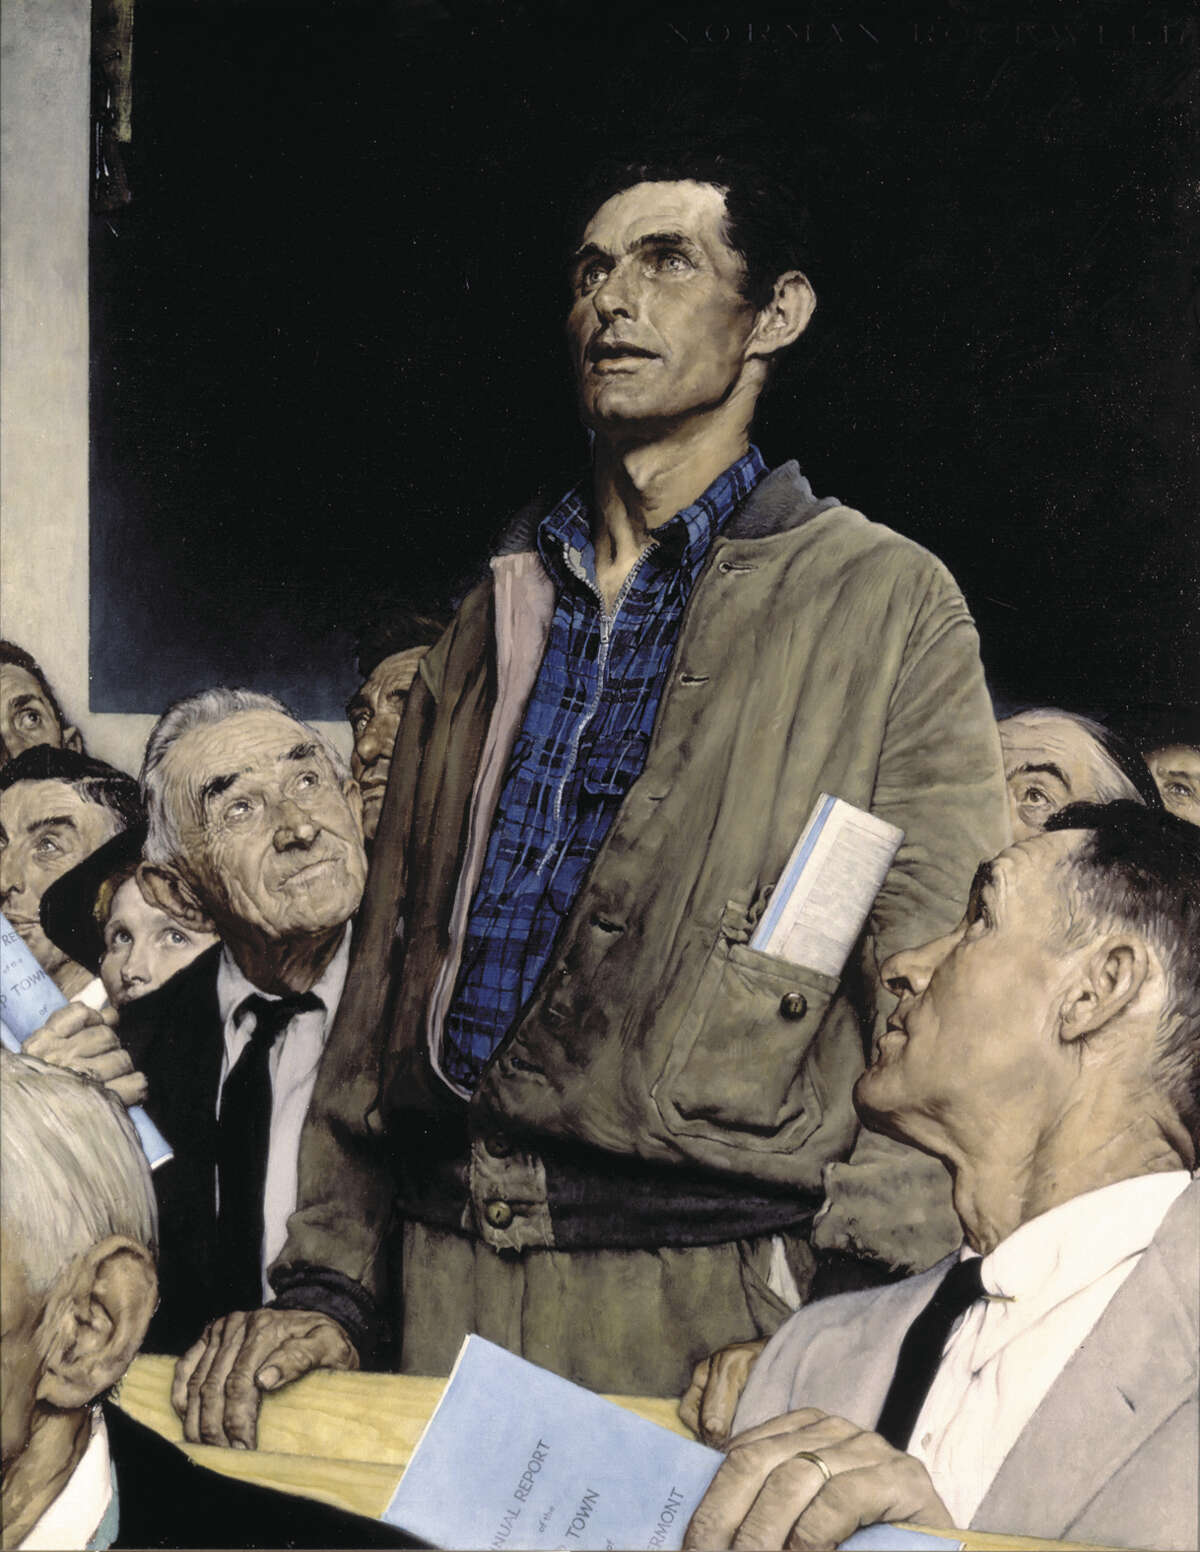 Freedom of Speech, Norman Rockwell Oil on canvas Saturday Evening Post, February 20, 1943 ?1943 SEPS: Licensed by Curtis Publishing, Indianapolis, IN Norman Rockwell Museum Collection